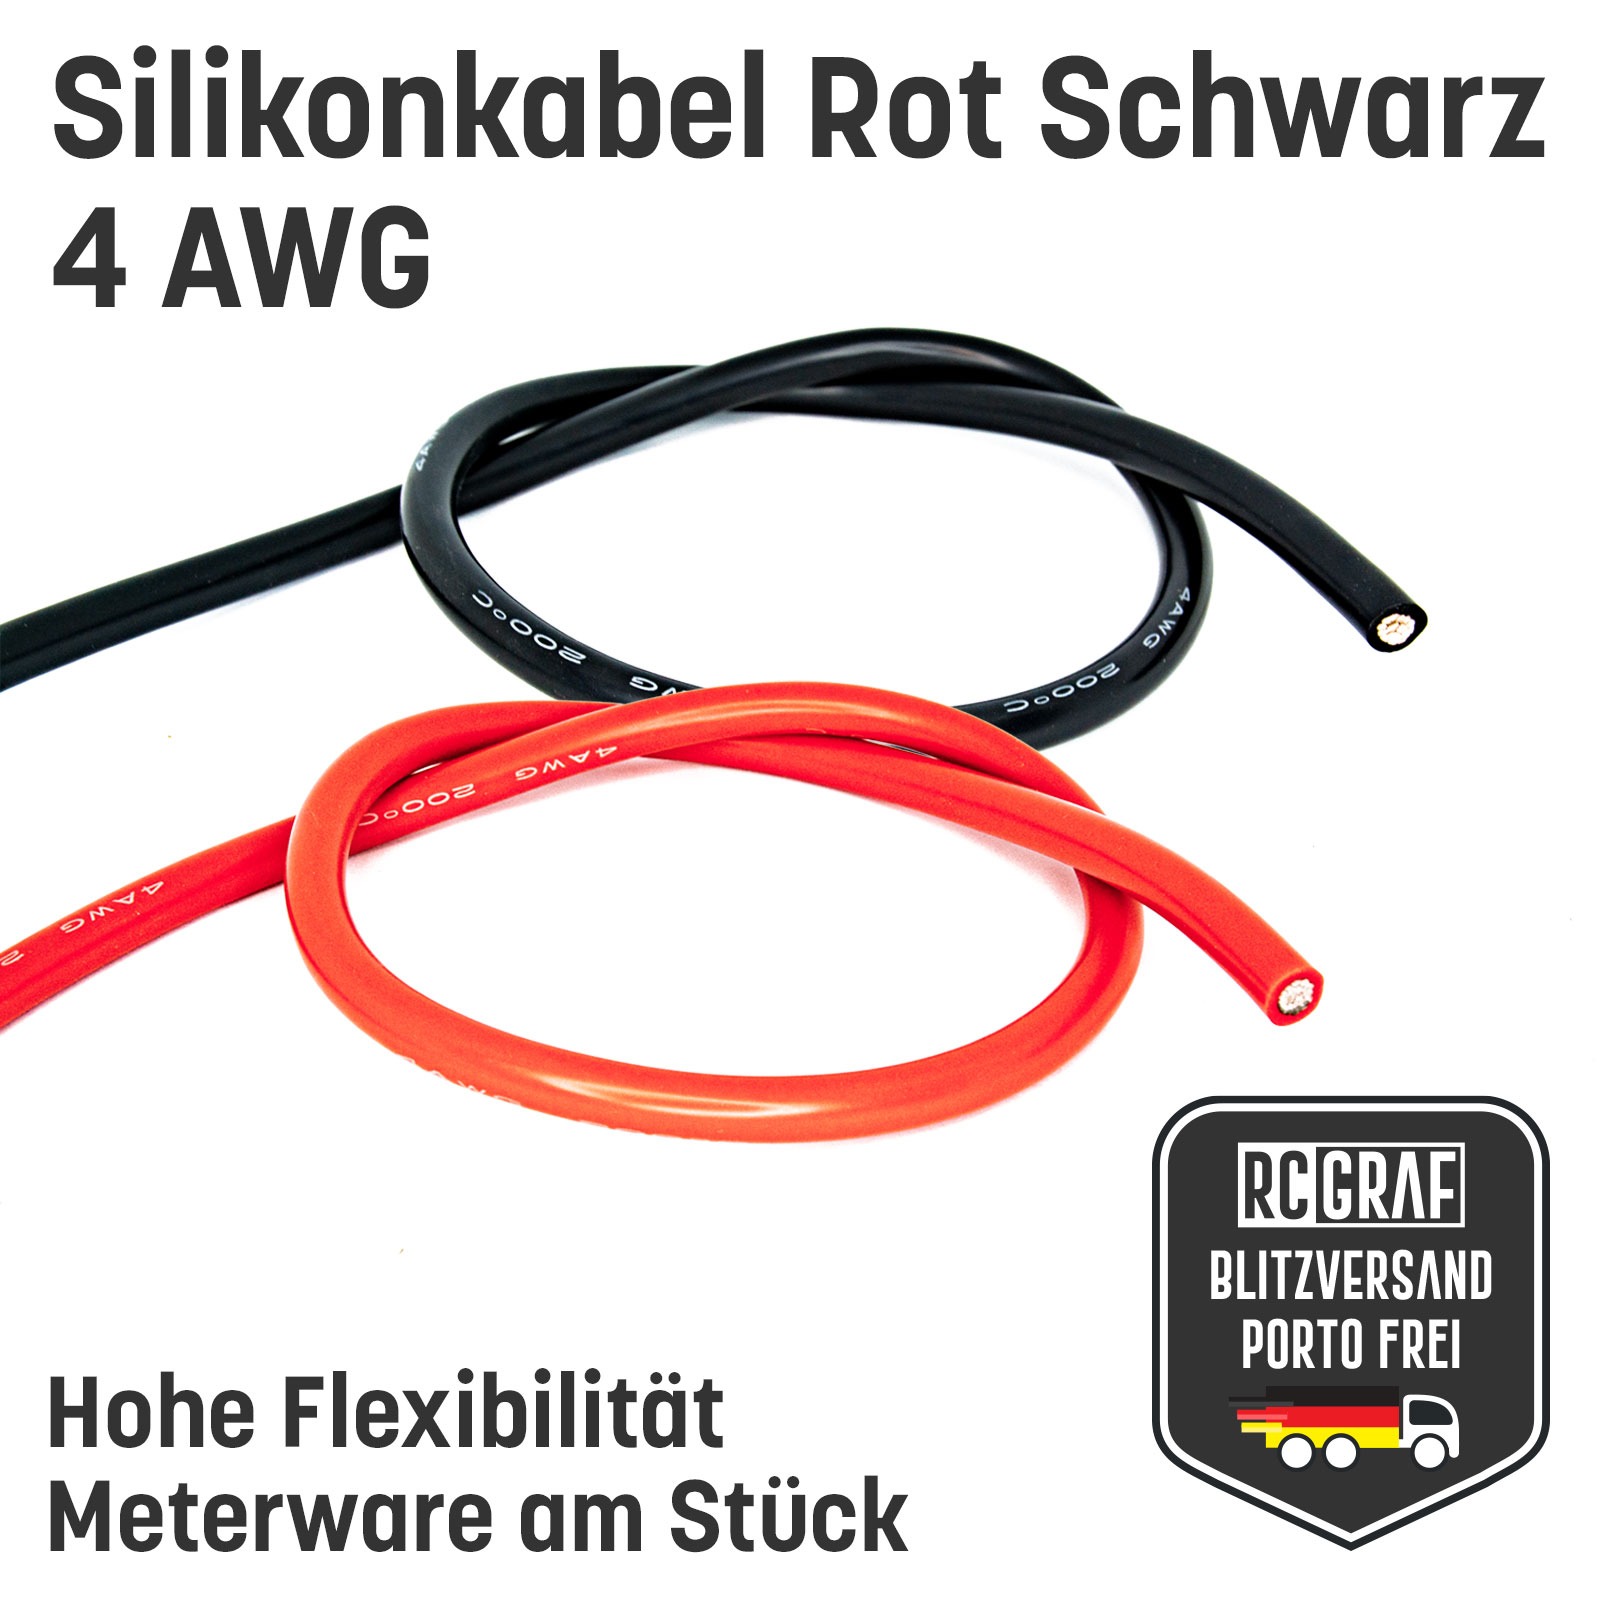 Silicone Cable 4 AWG High Flex Red Black Copper RC Cable